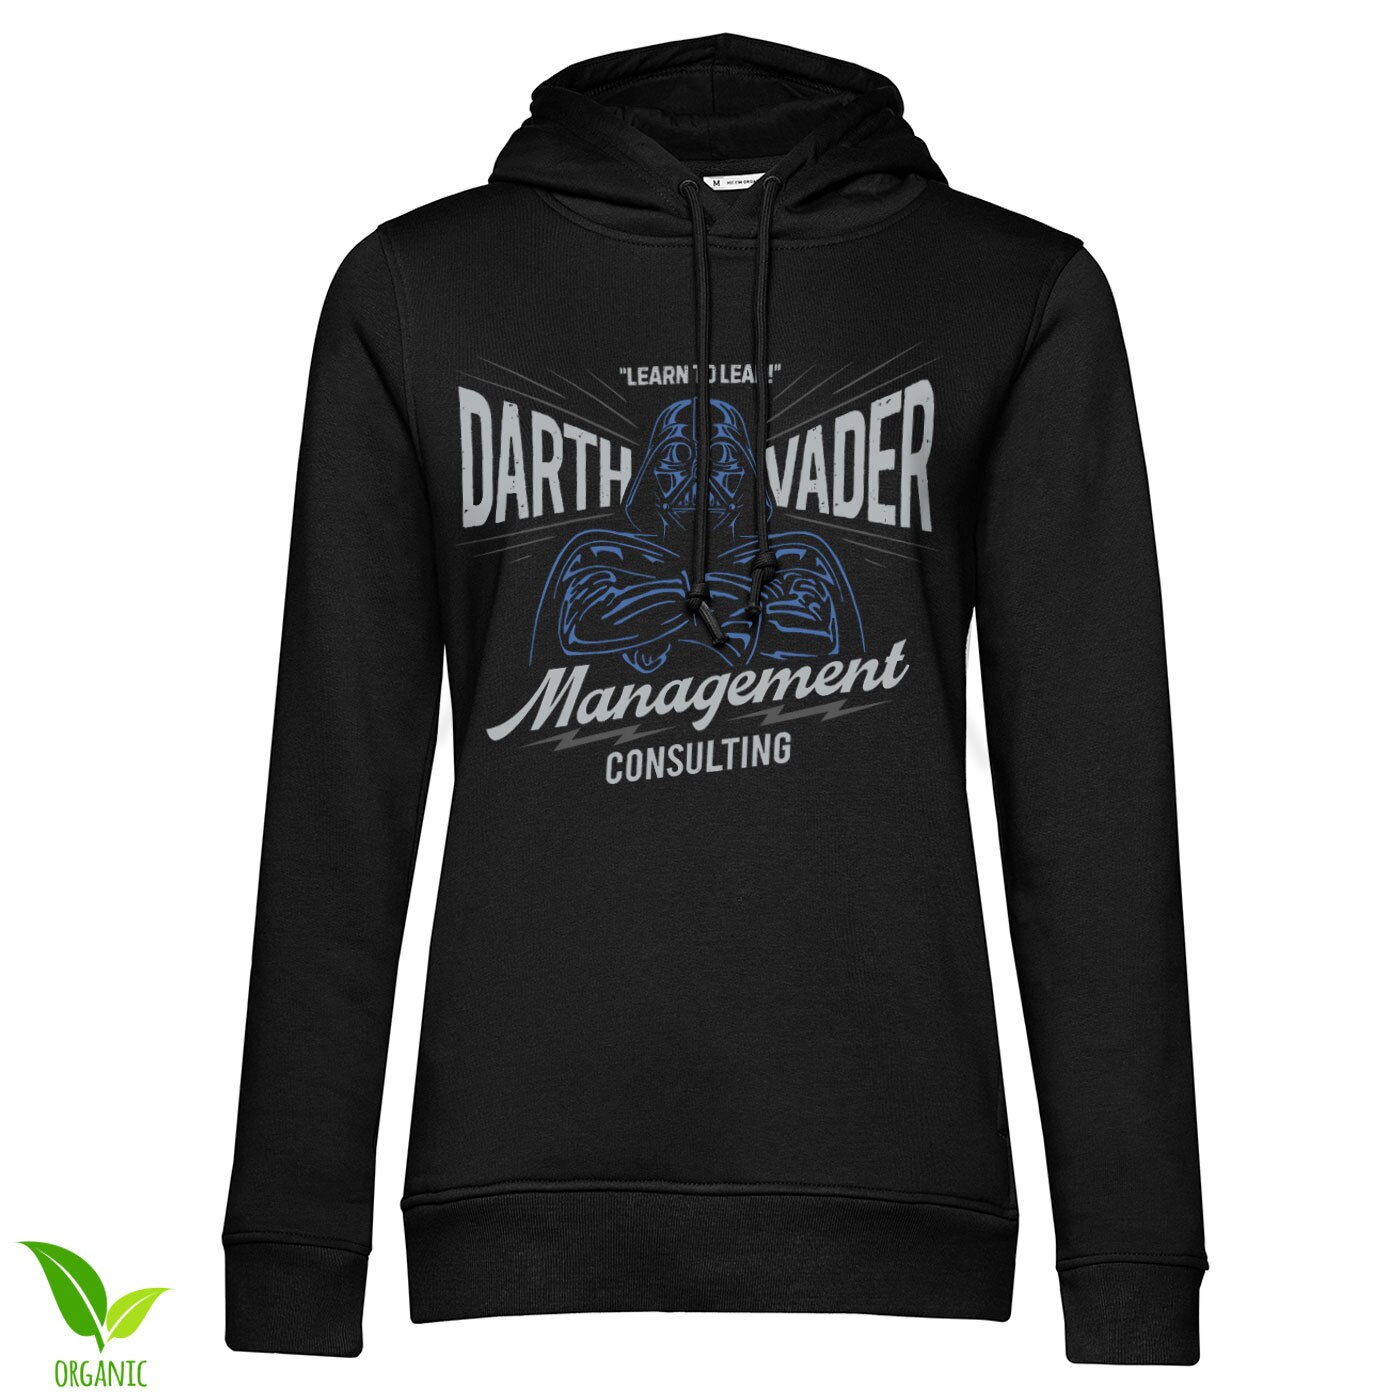 Darth Vader Management Consulting Girls Hoodie